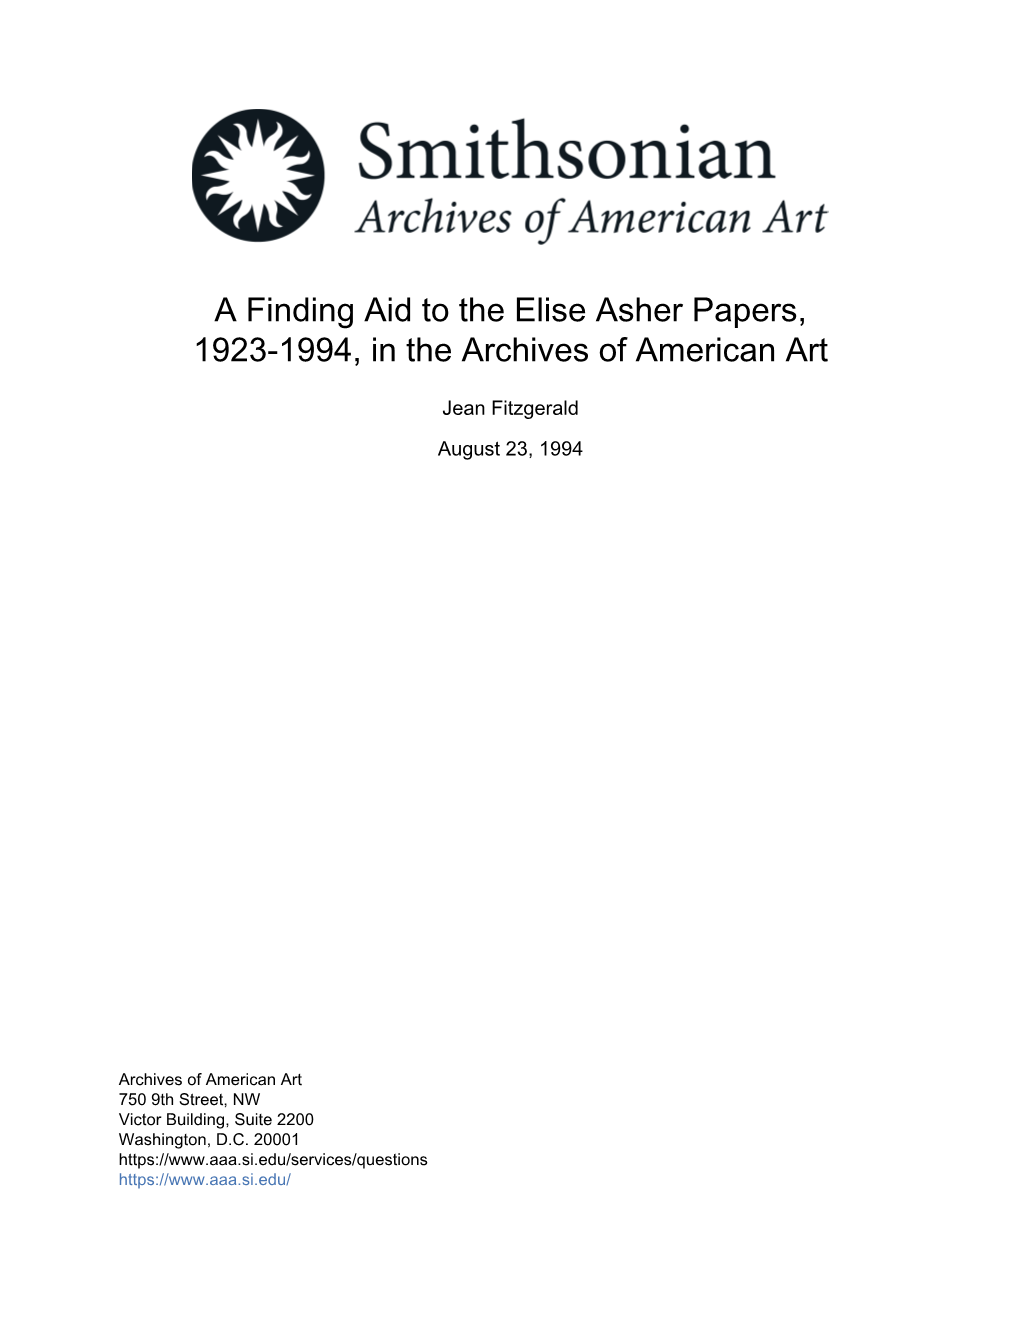 A Finding Aid to the Elise Asher Papers, 1923-1994, in the Archives of American Art